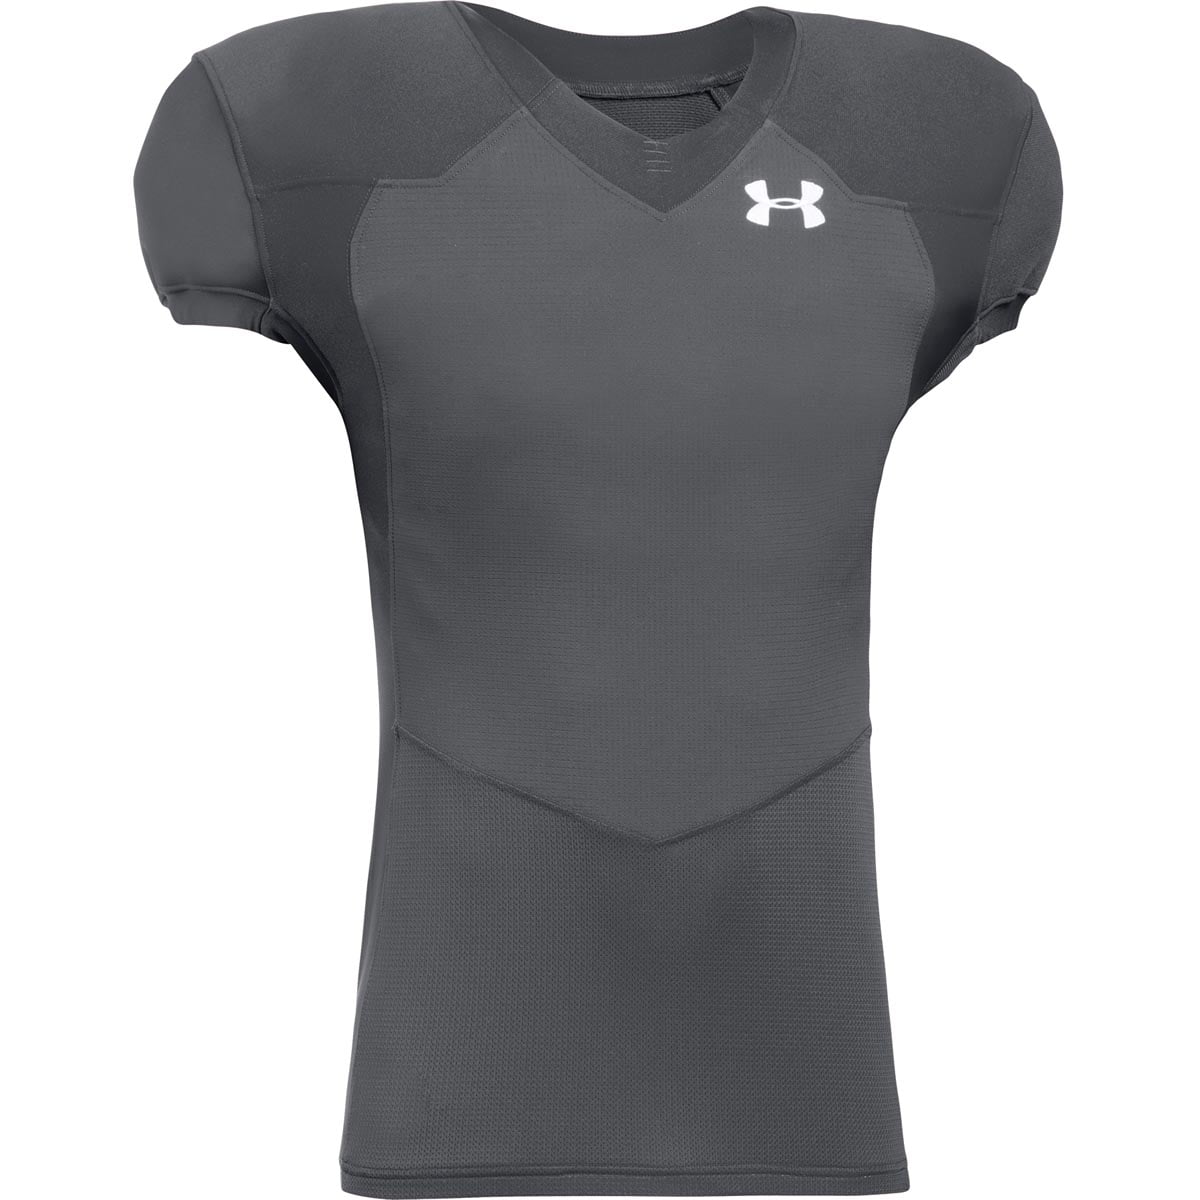 Under Armour Men's ArmourGrid Football Jersey - Walmart.com